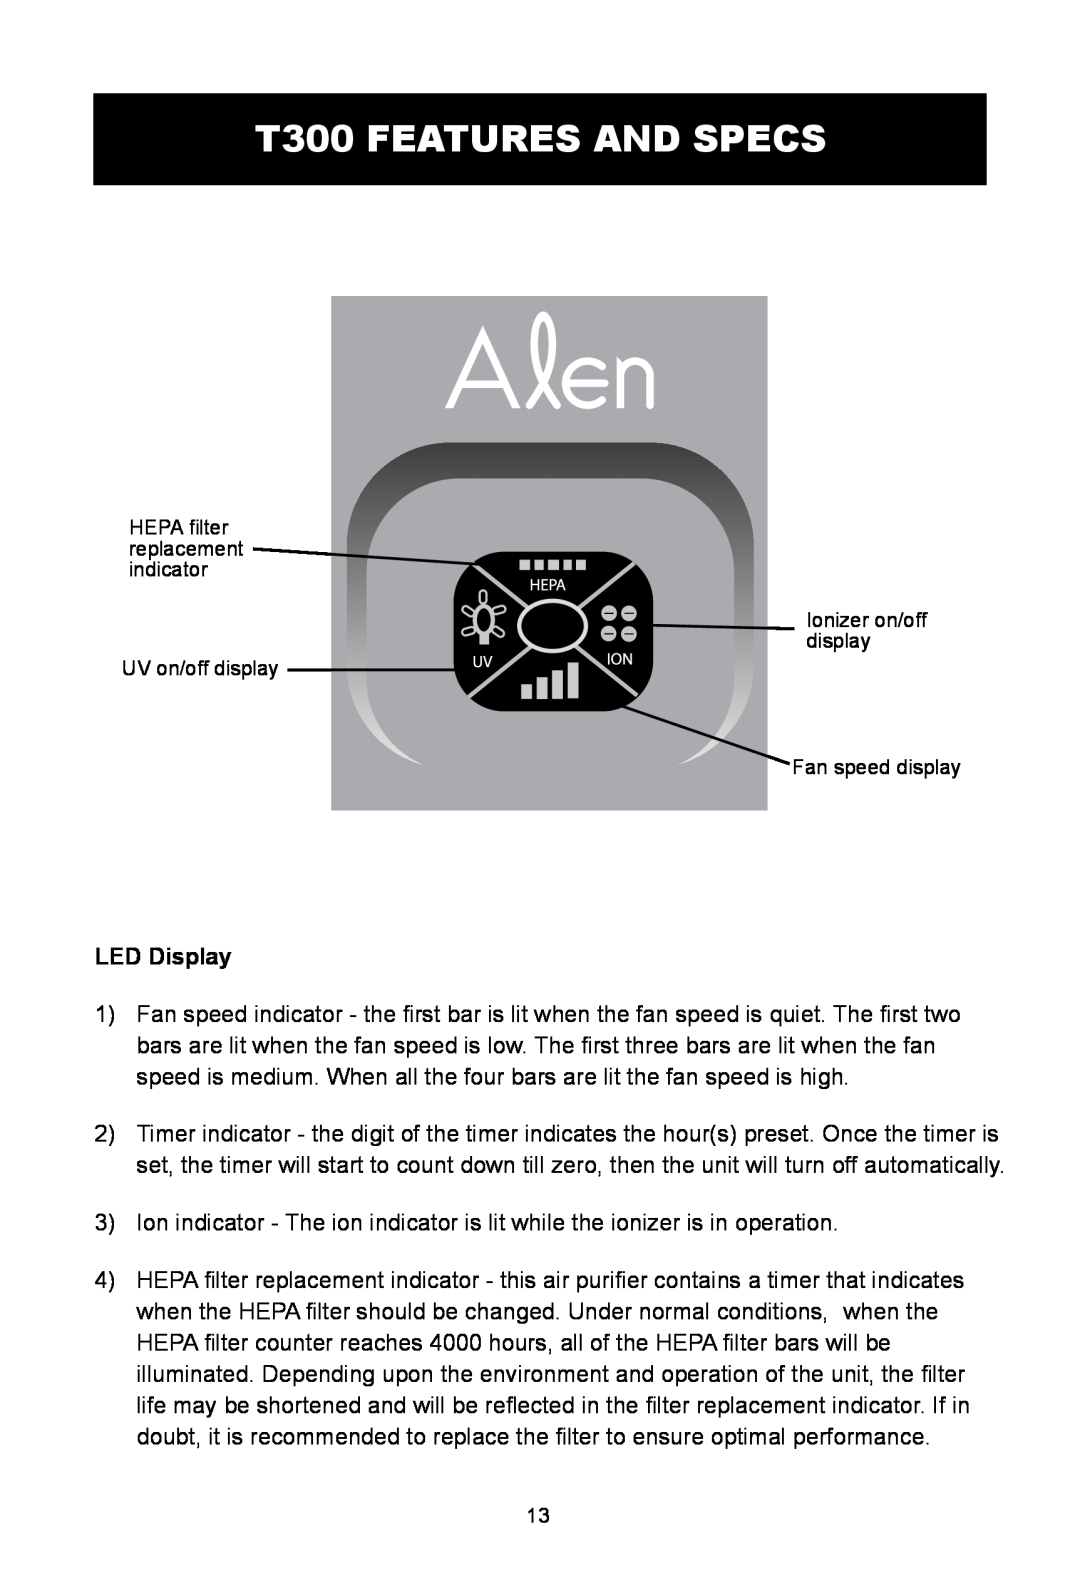 Alen A375 UV, T100, A350 user manual T300 FEATURES AND SPECS, LED Display 